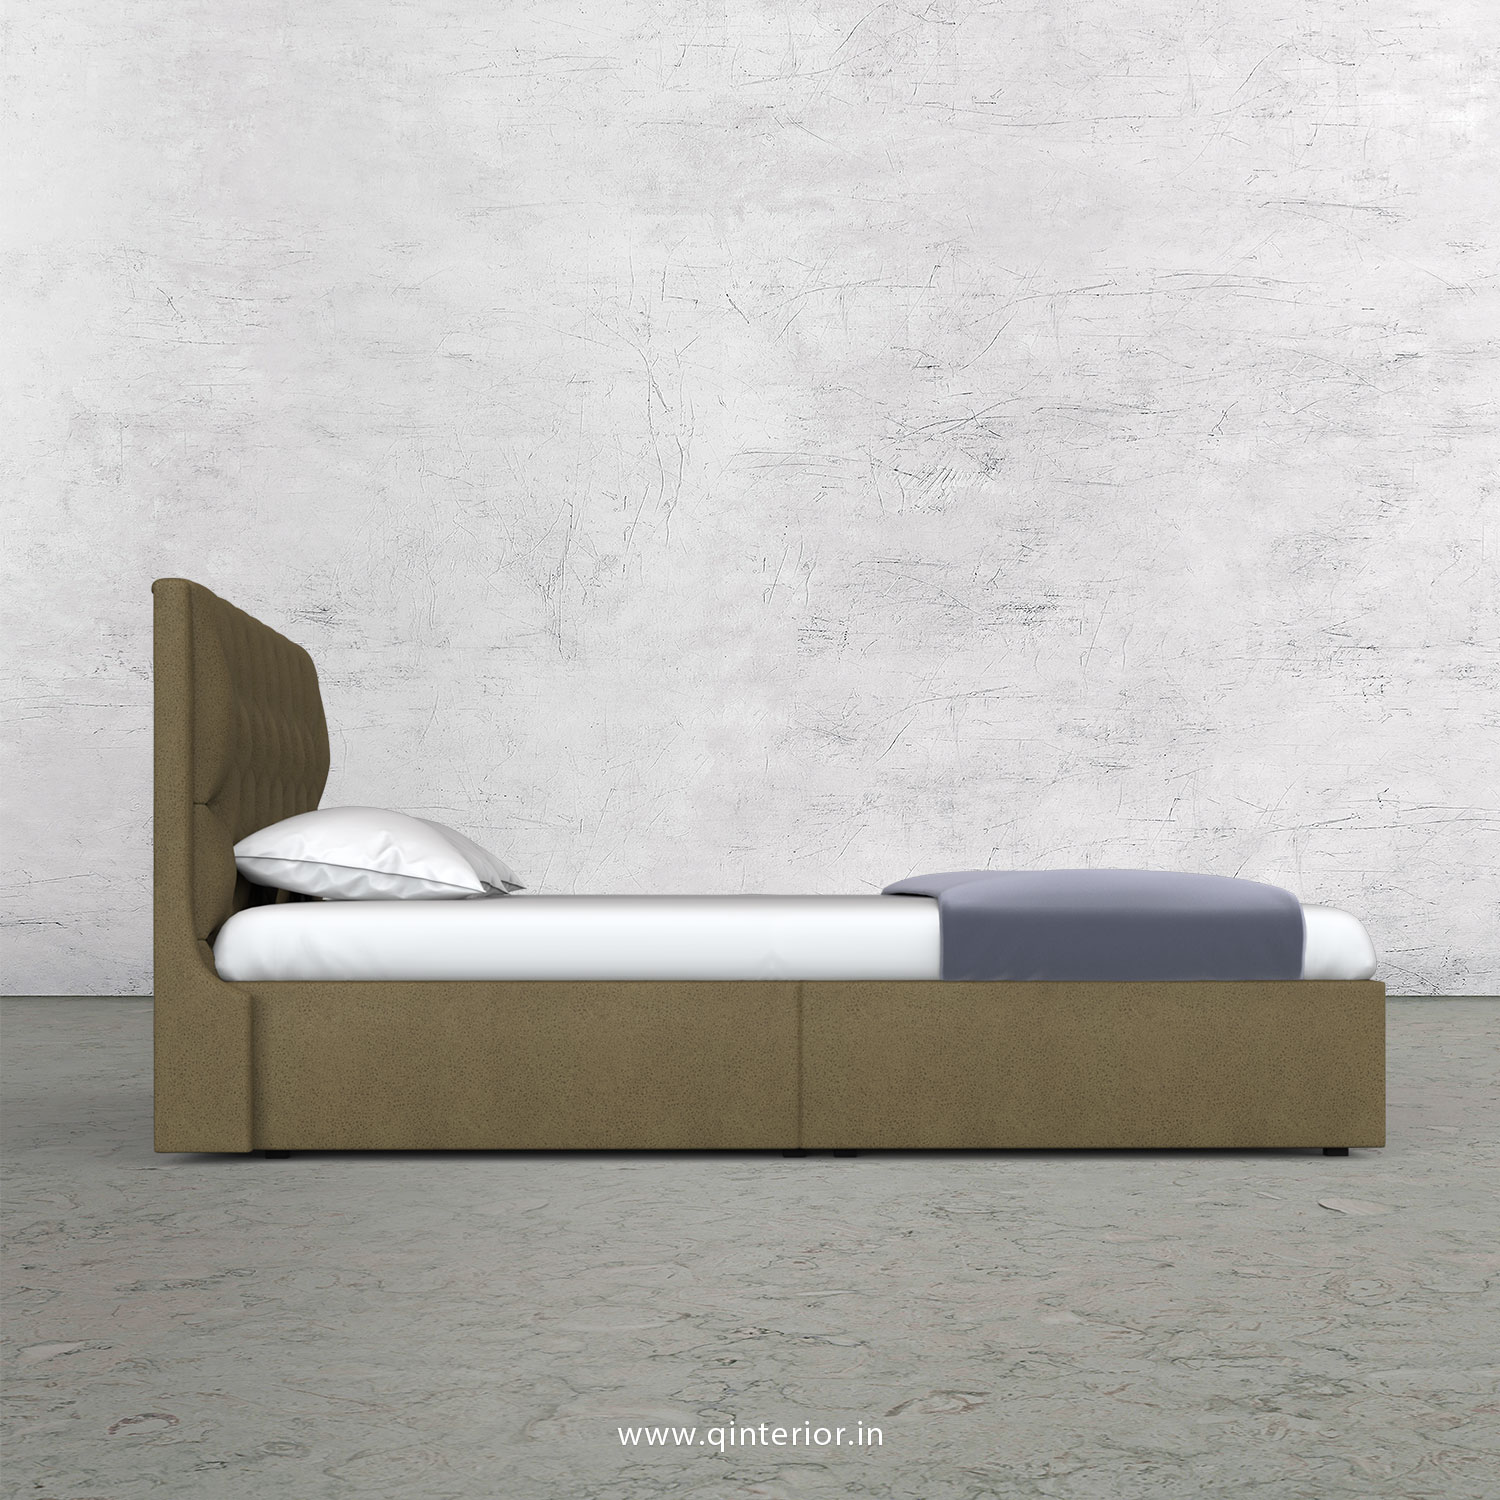 Scorpius Queen Storage Bed in Fab Leather Fabric - QBD001 FL01